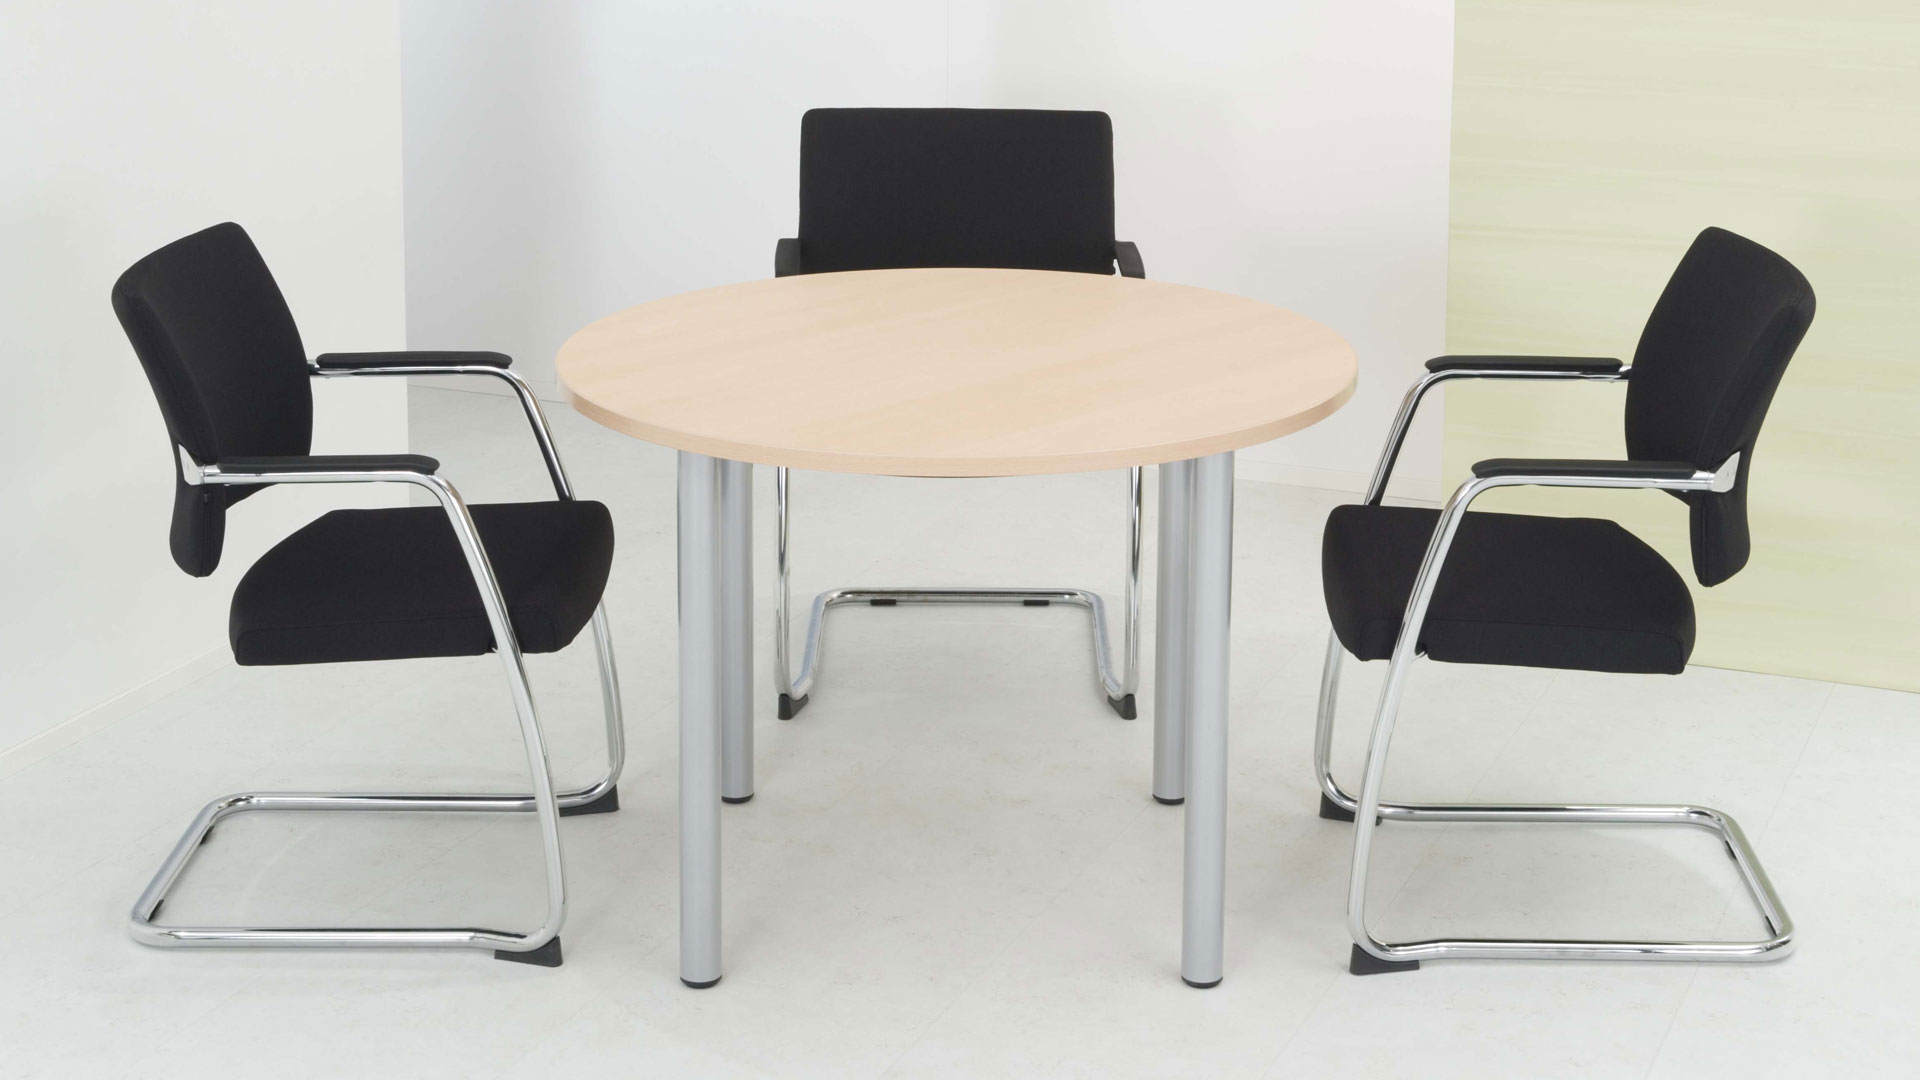 Optima round meeting table with pole legs